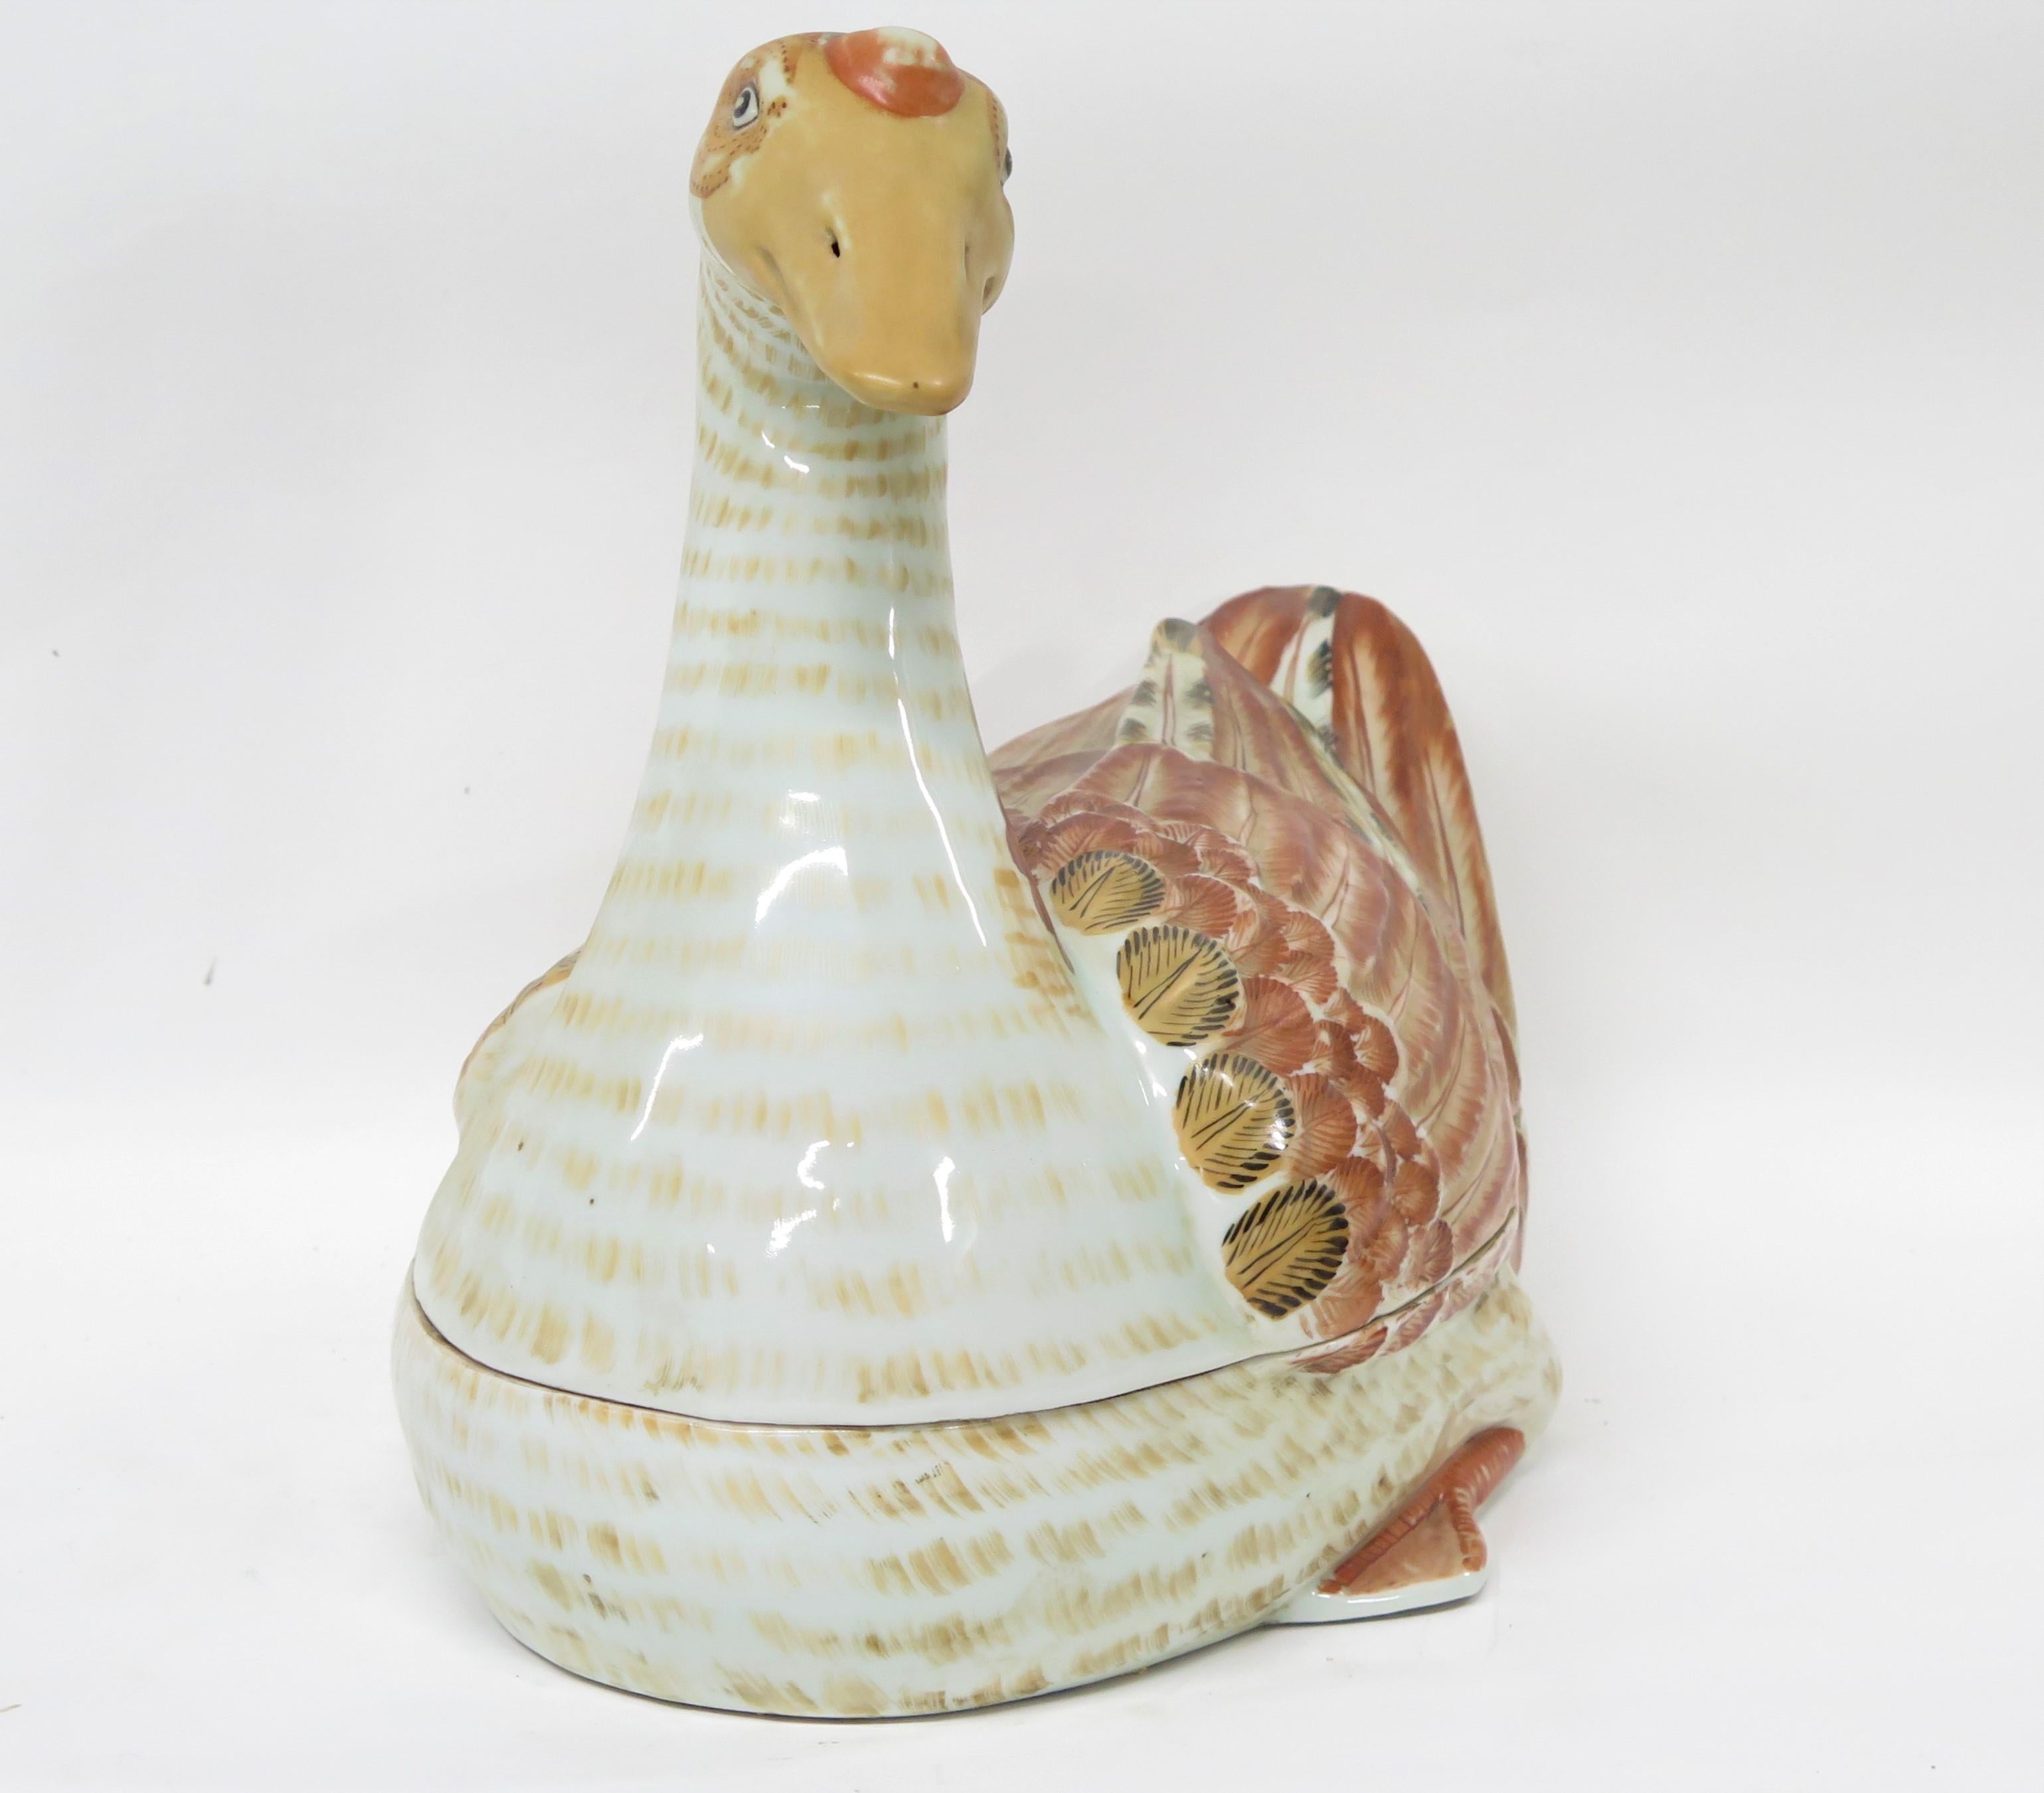 wonderful goose shaped burnt orange Chinese hand-painted tureen, China, late 20th century

(Two available.  Priced individually)

MEASUREMENTS;

14.5